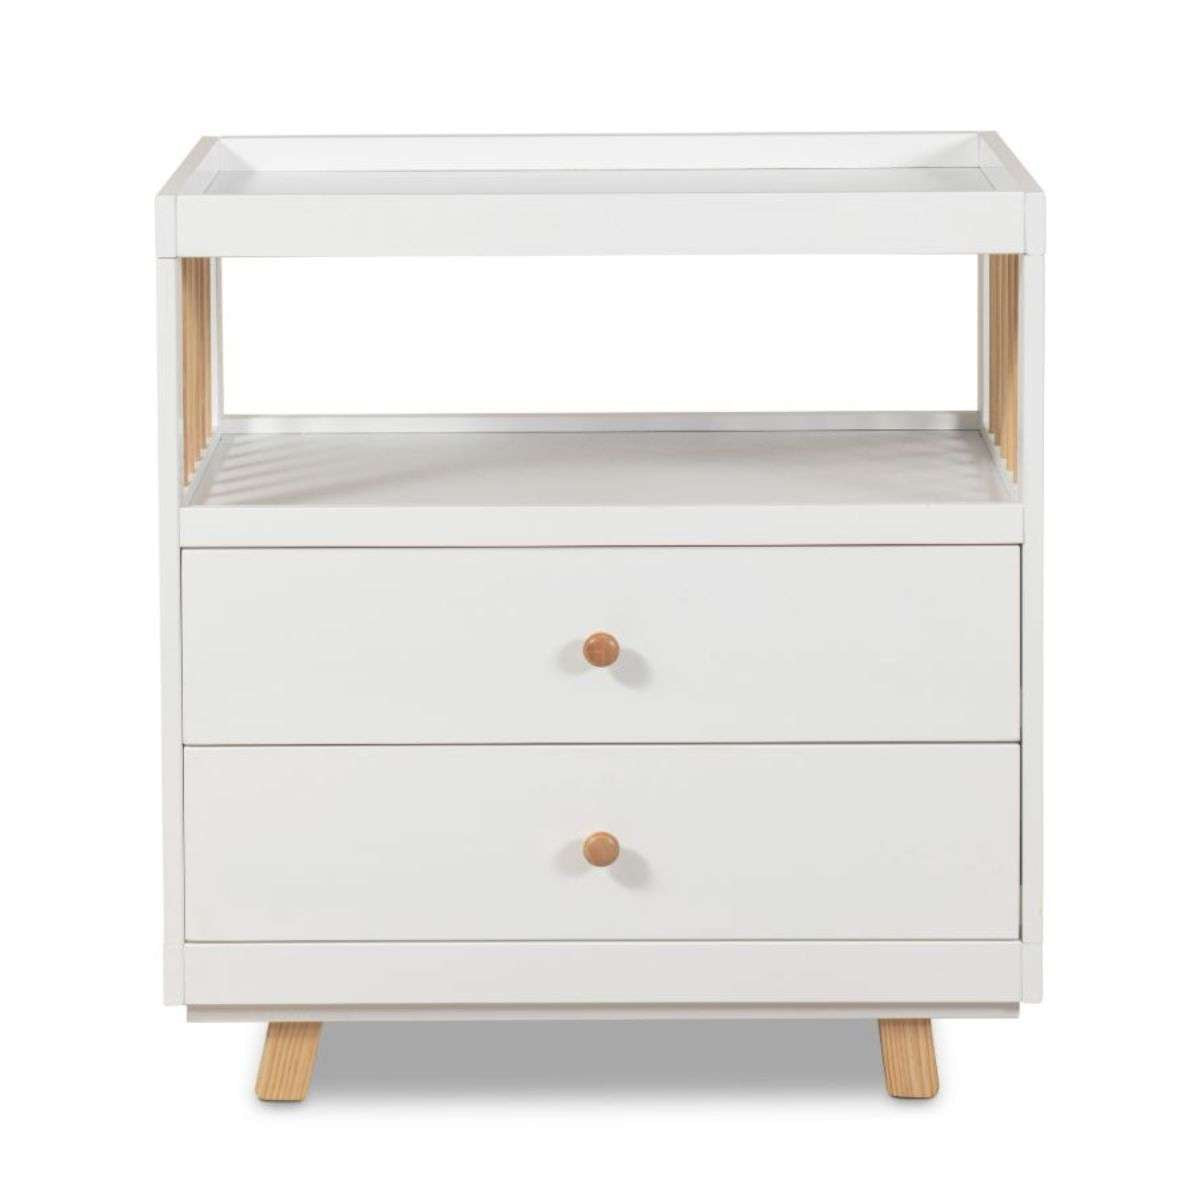 Aspen Change Table with Drawers - White/Natural